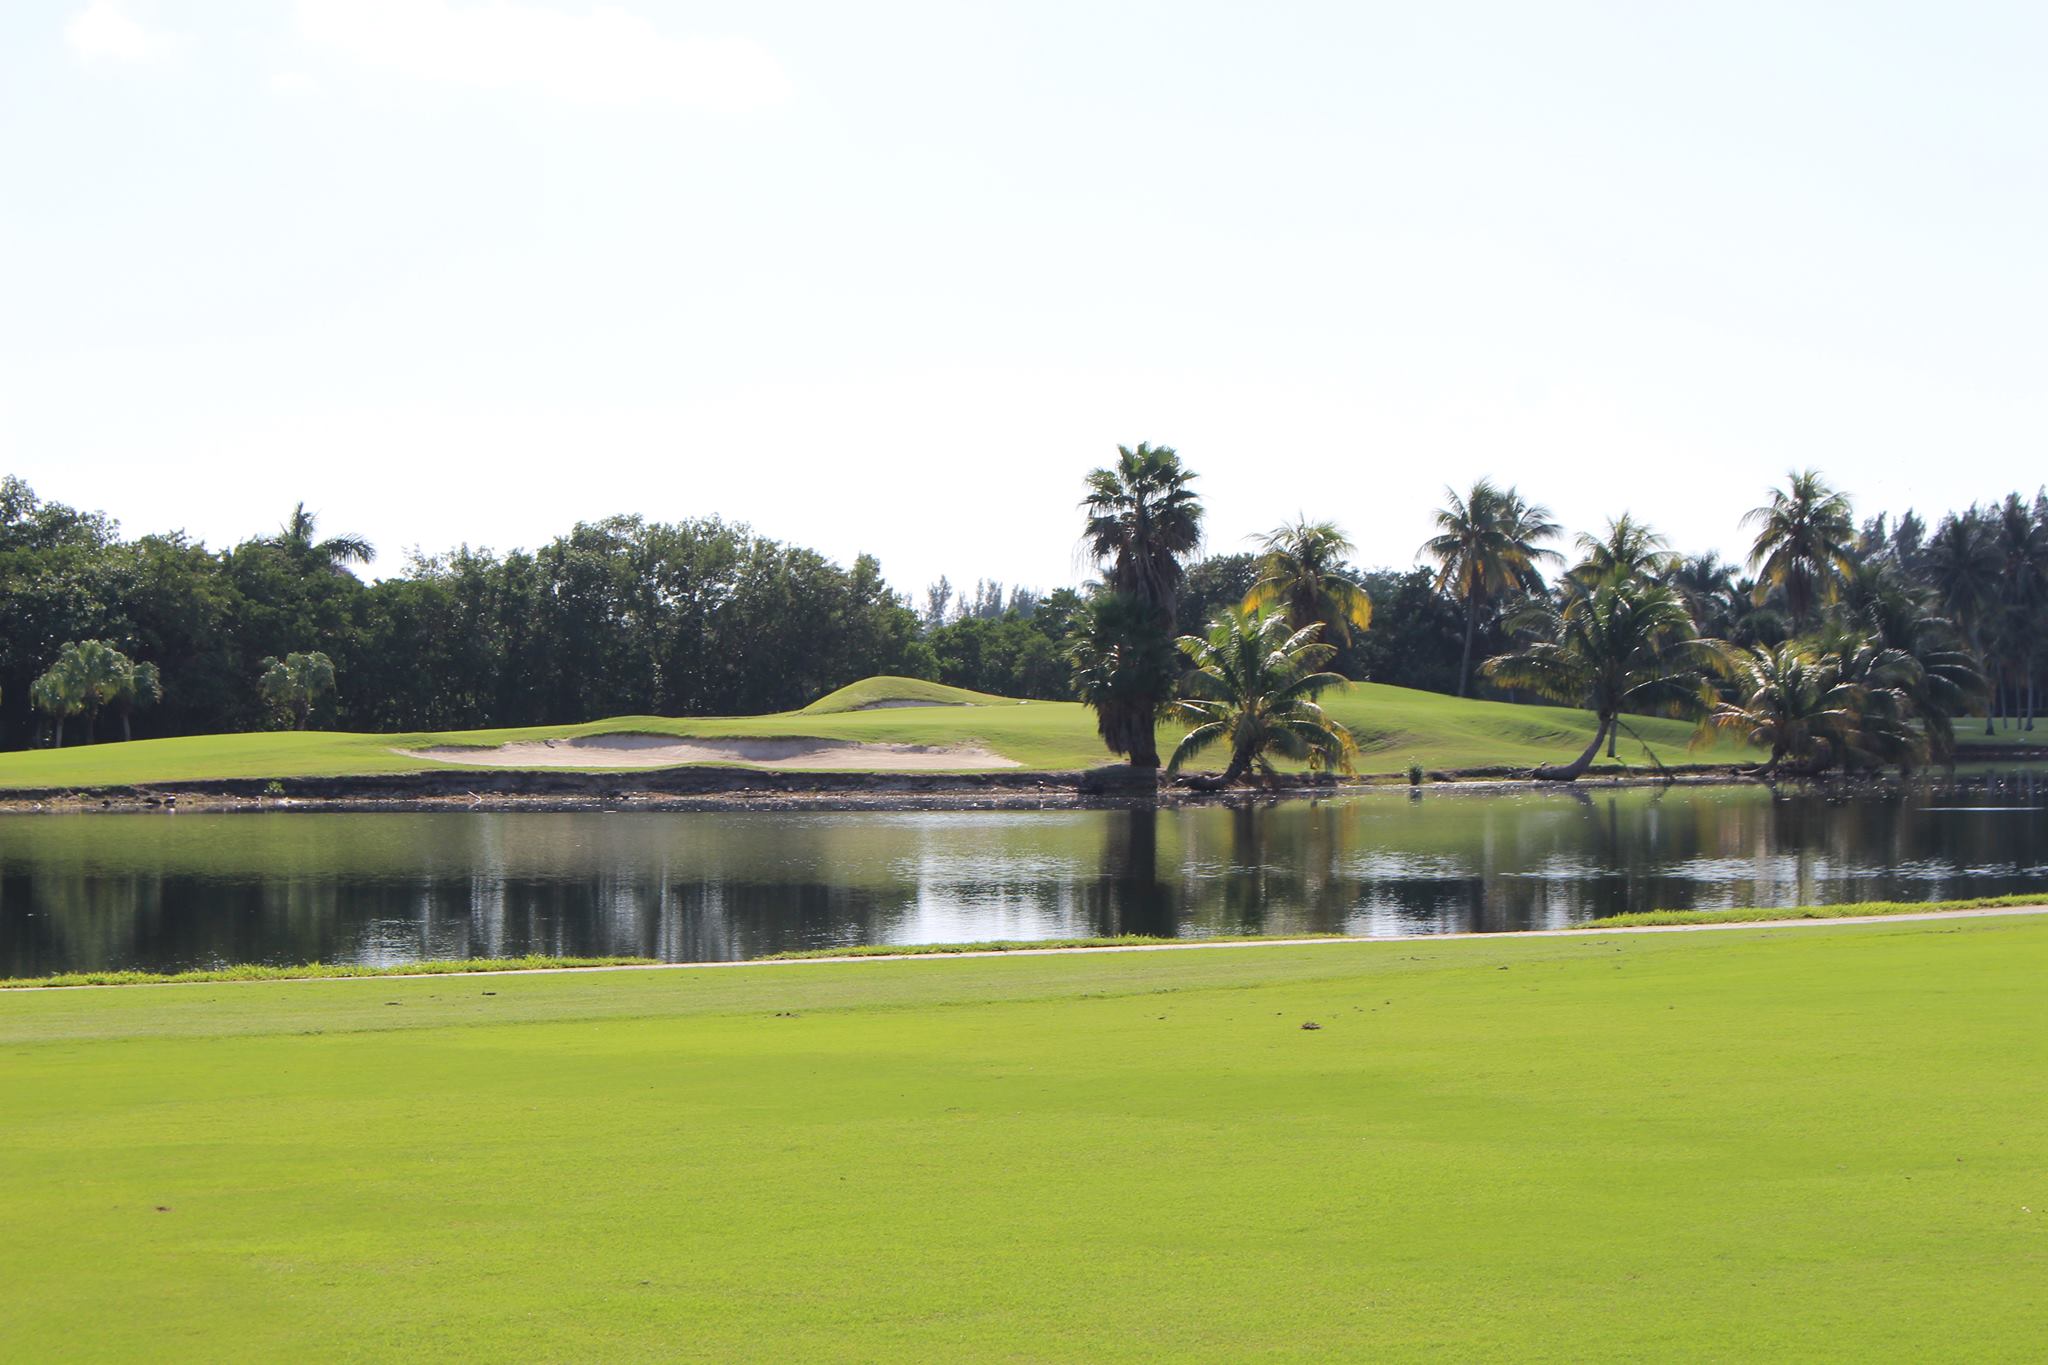 A view from one of the greens across a water hazard, met with a few bunkers a hill, and a wall of palm trees.